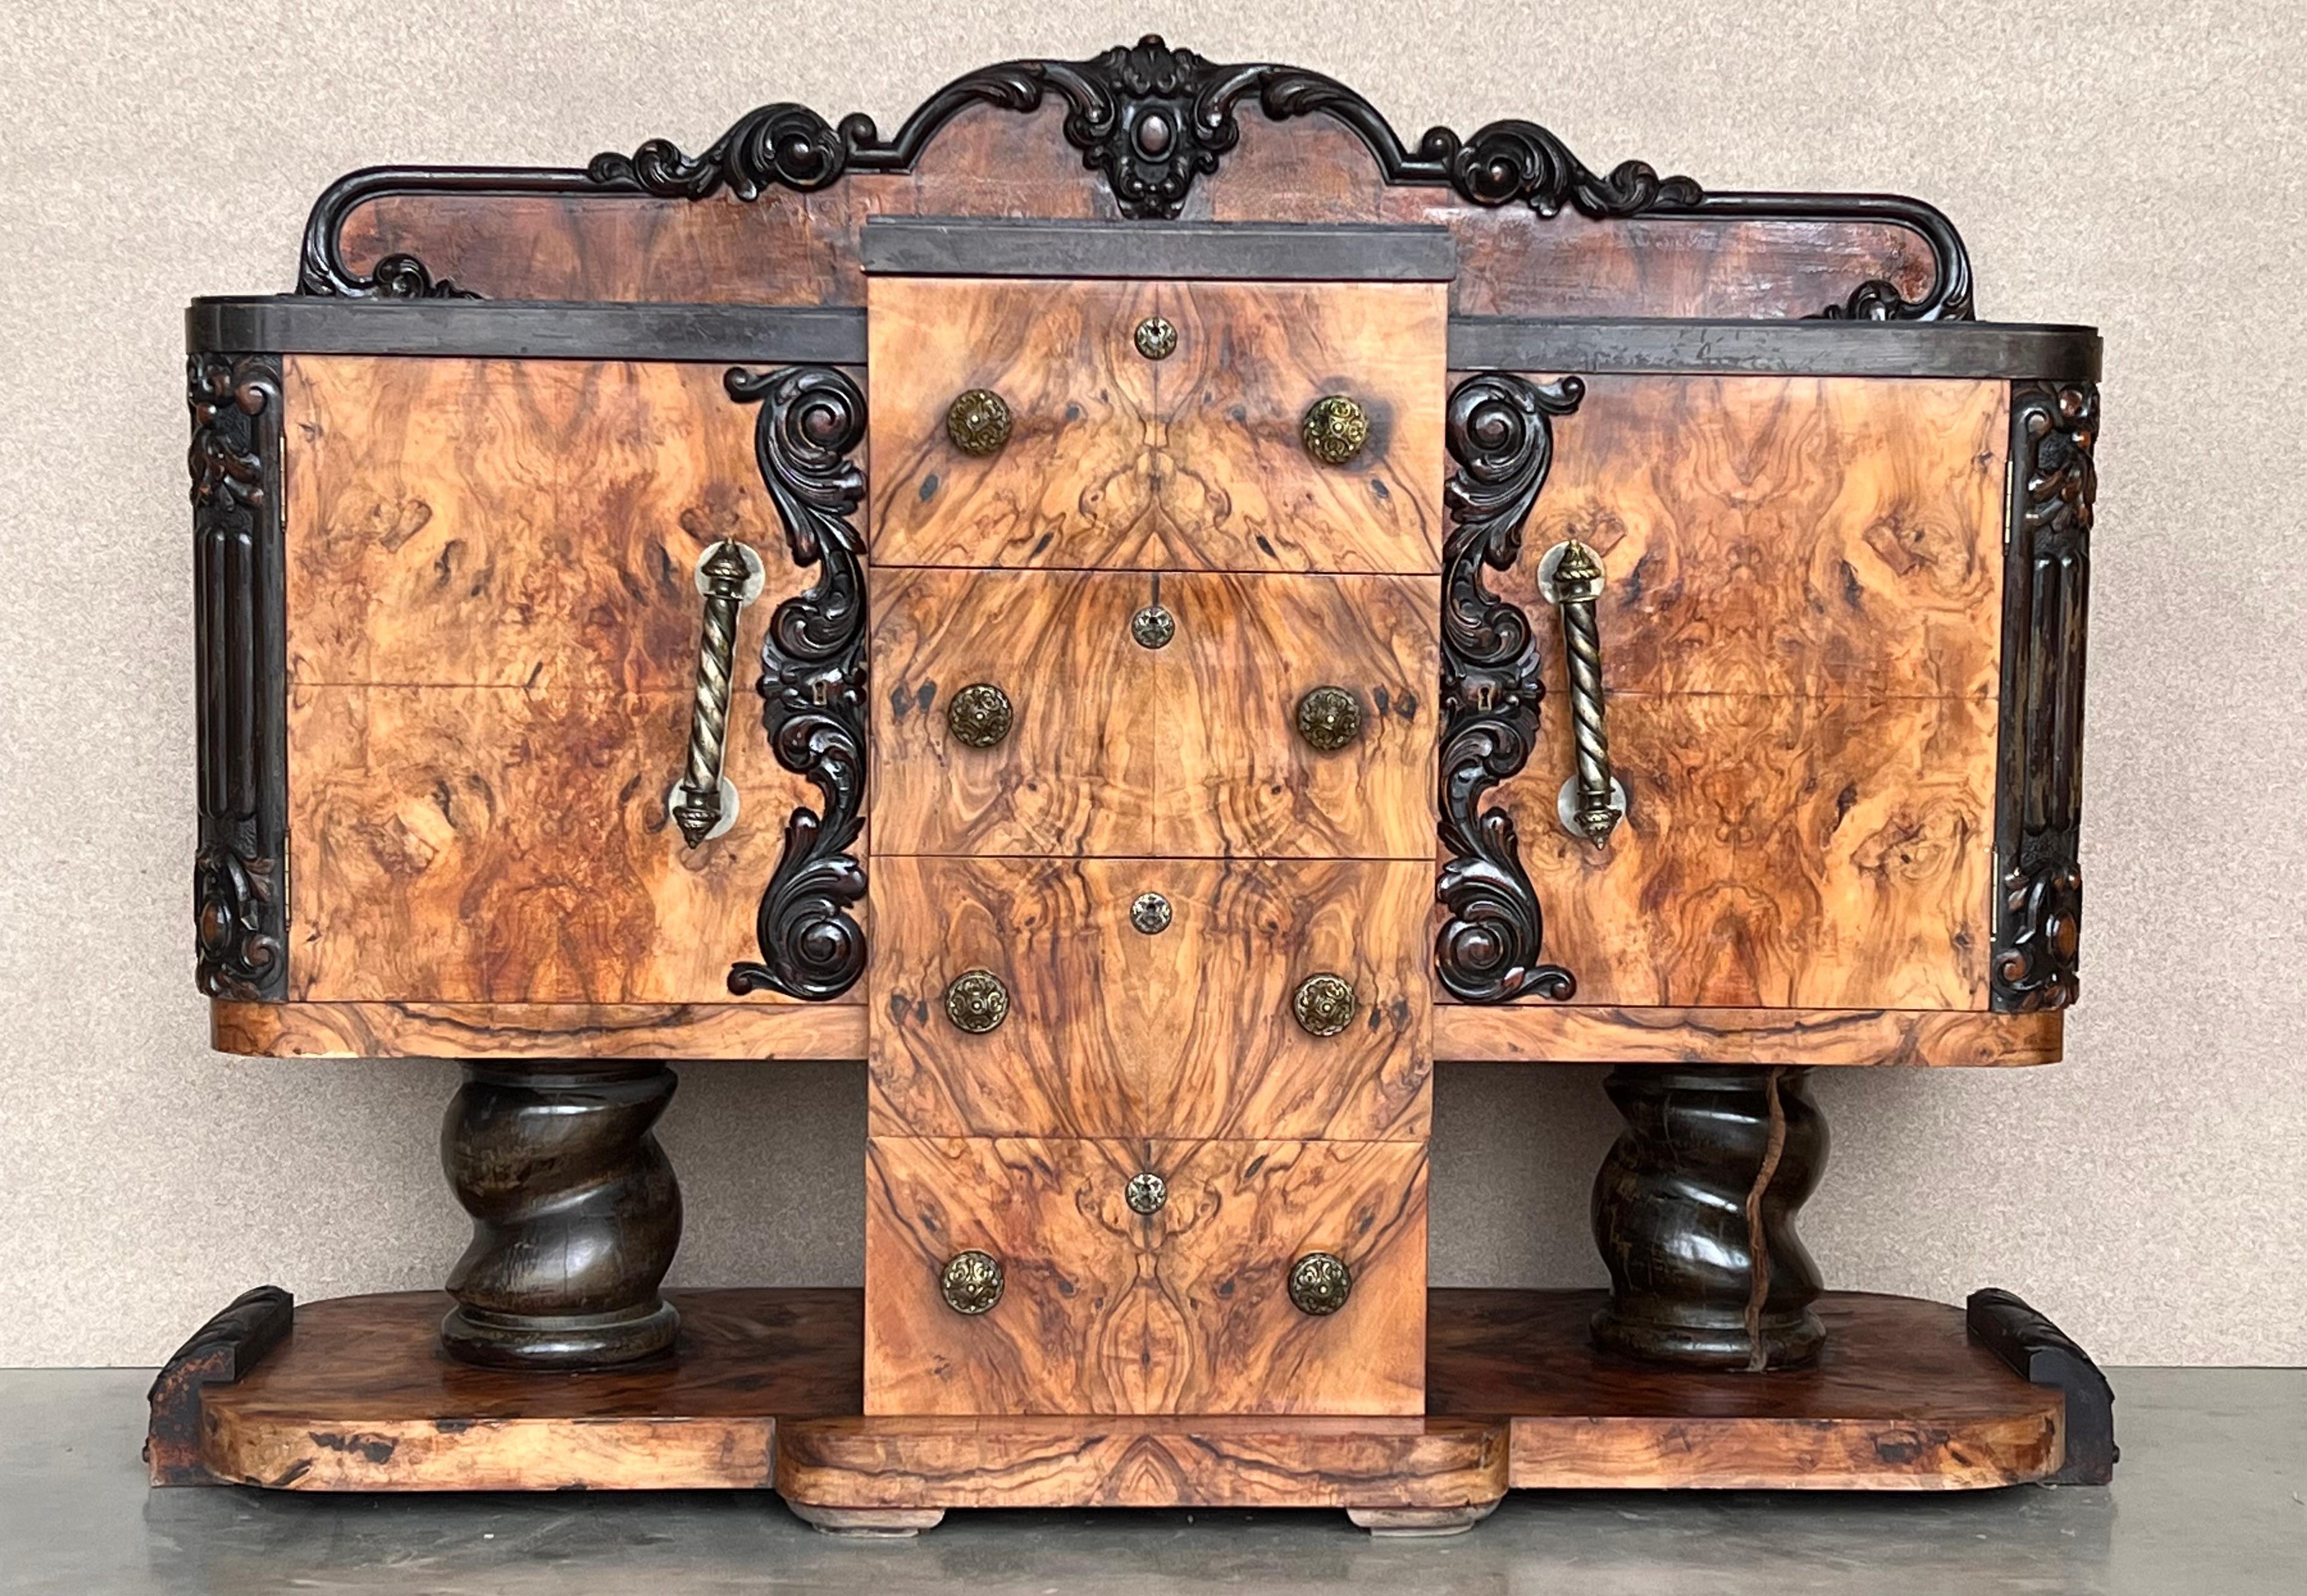 Unique designed Art Deco sideboard or buffet out of Spain from the period circa 1925. This unusual shaped side board impresses with an absolute great book matched burr walnut veneer, giving it a real mesmerizing grain. The exceptional design with